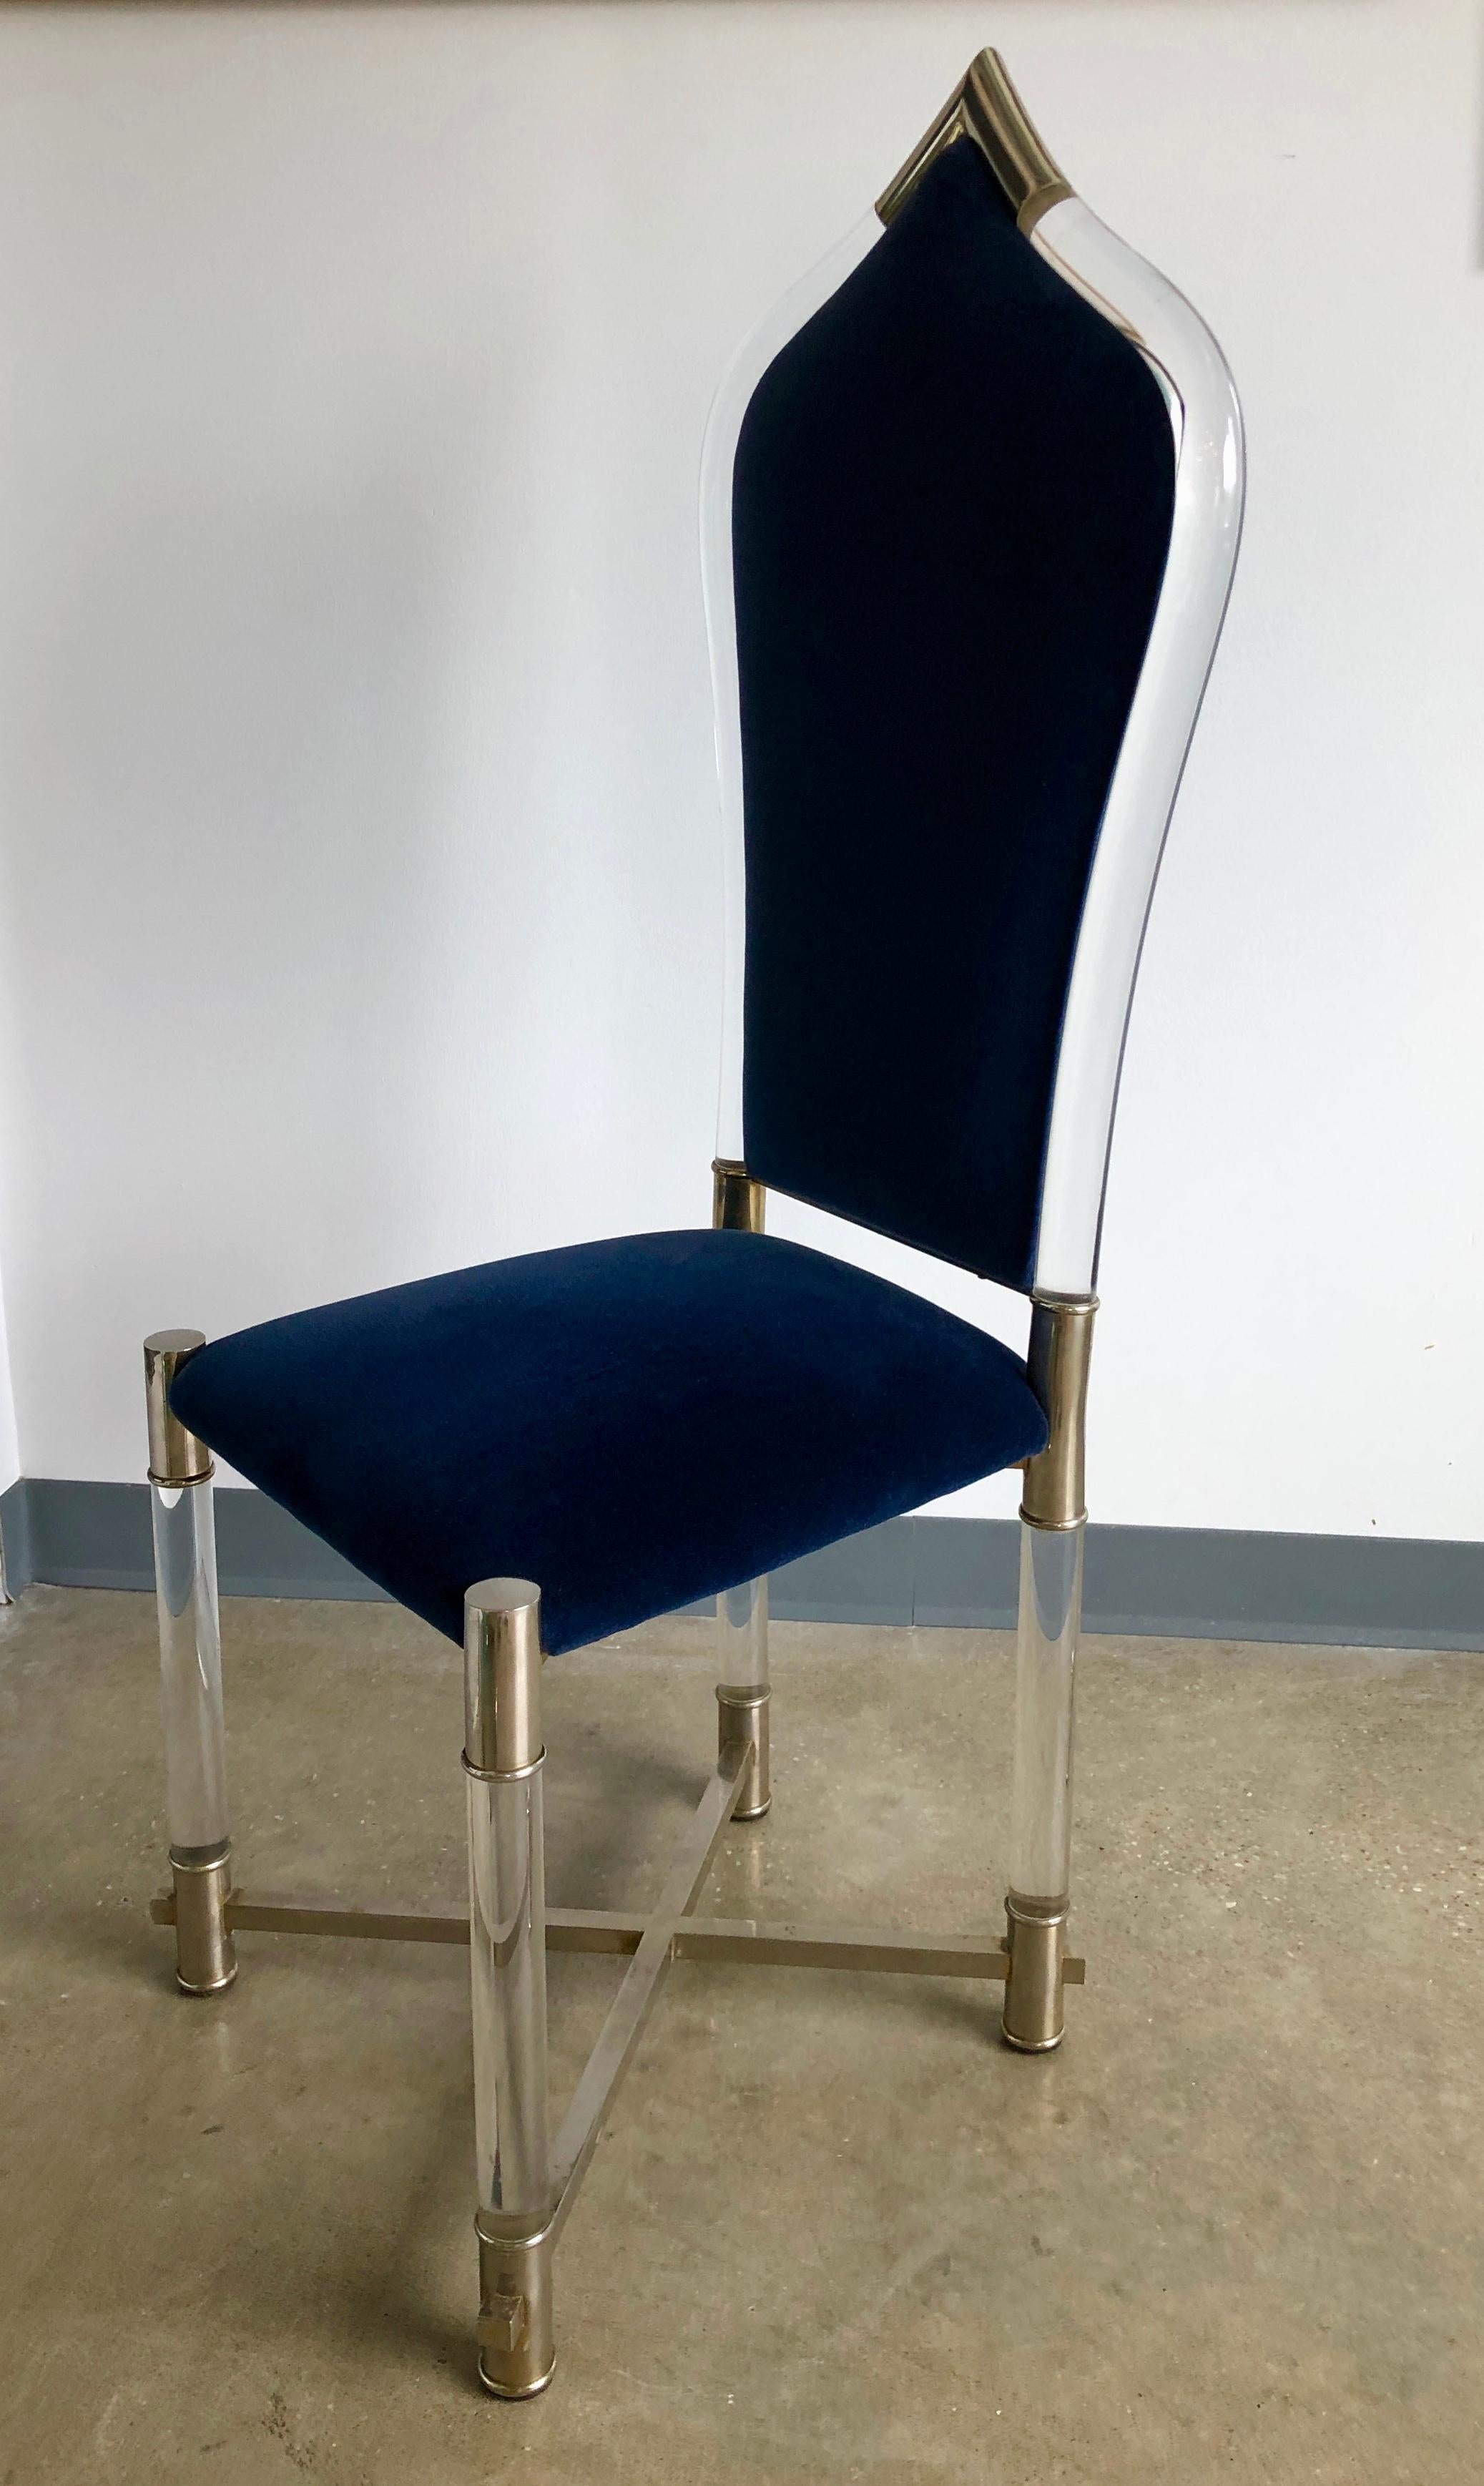 Offered is a Mid-Century Modern Italian and very special piece from Antonio Pavia. The accent high back chair with a Lucite frame, clear lacquered stainless steel and new sapphire blue velvet is a nod to the style of Moorish architecture. This chair